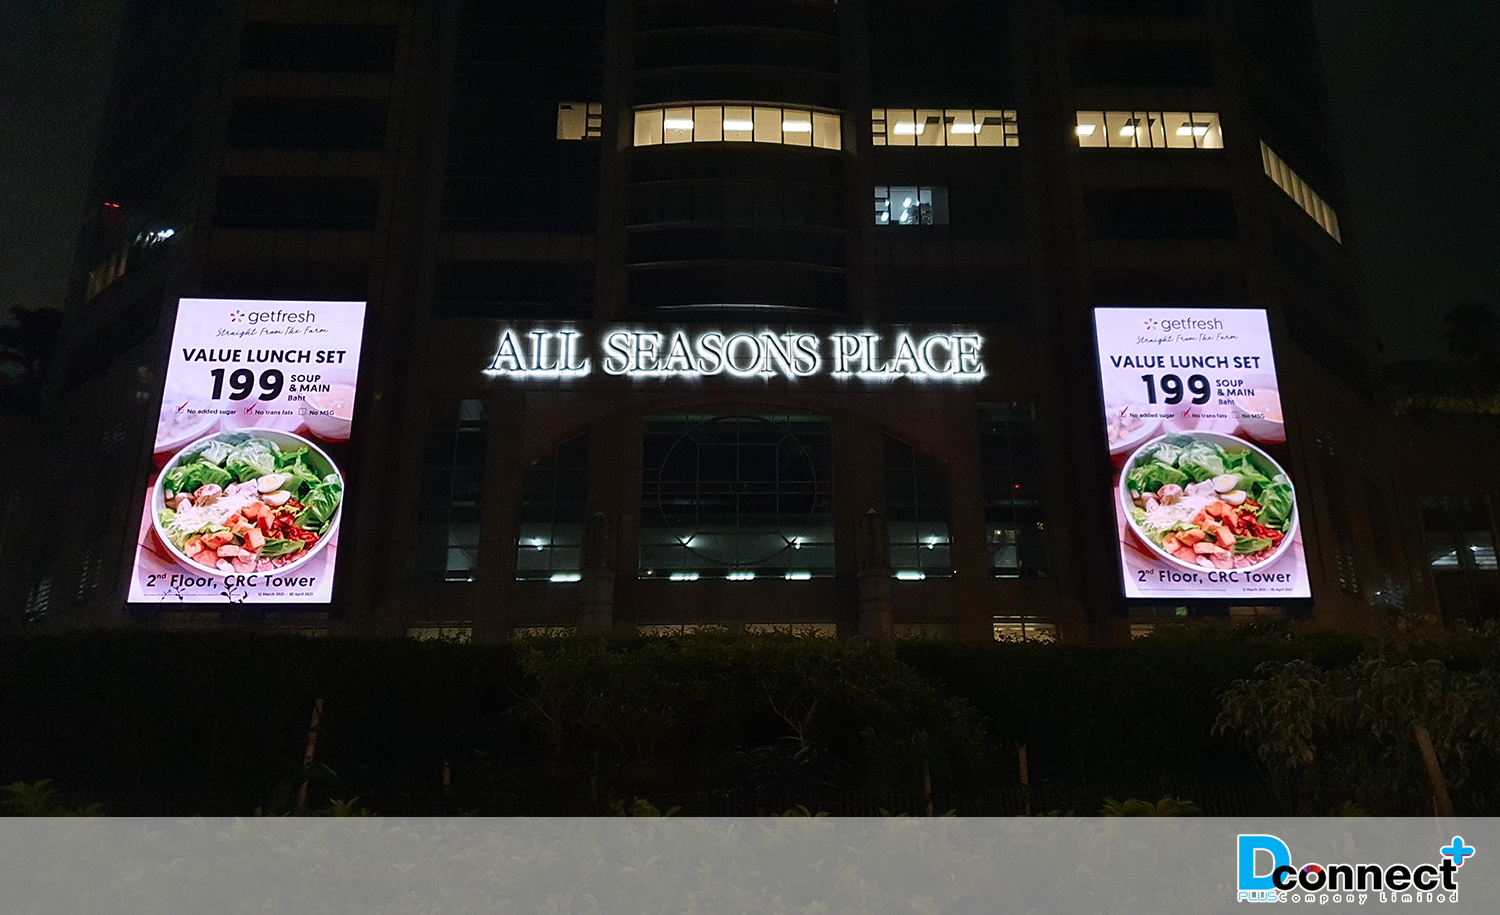  Outdoor LED Display – All Seasons Place